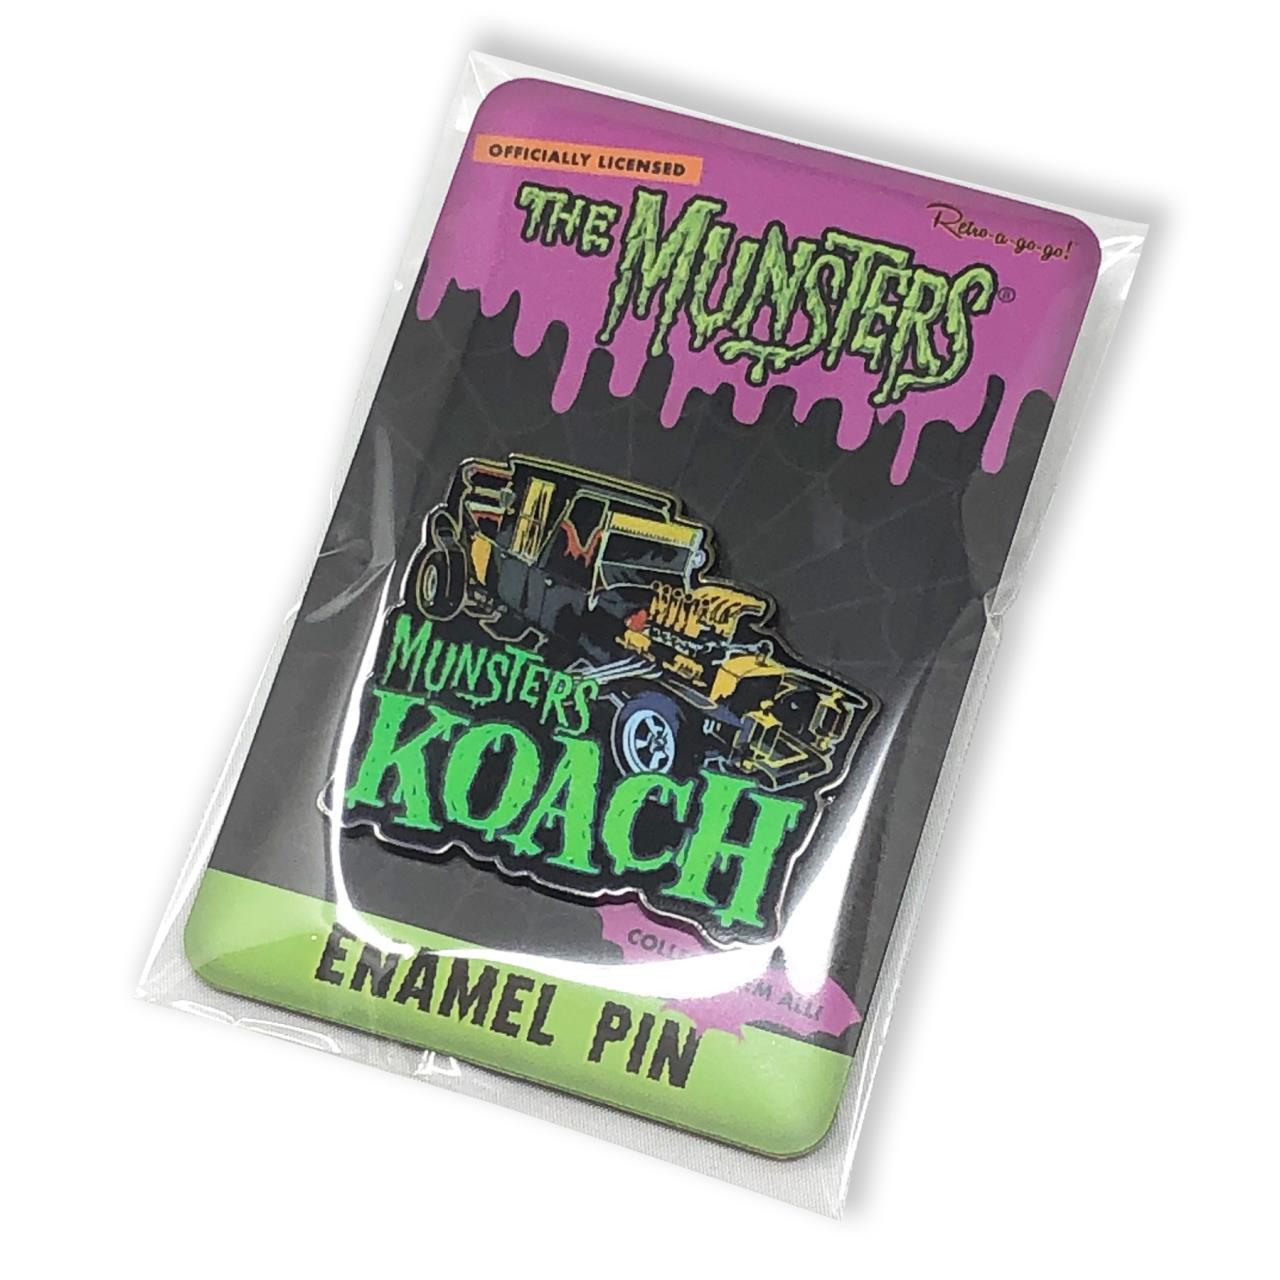 Munster's Koach Collectable Pin